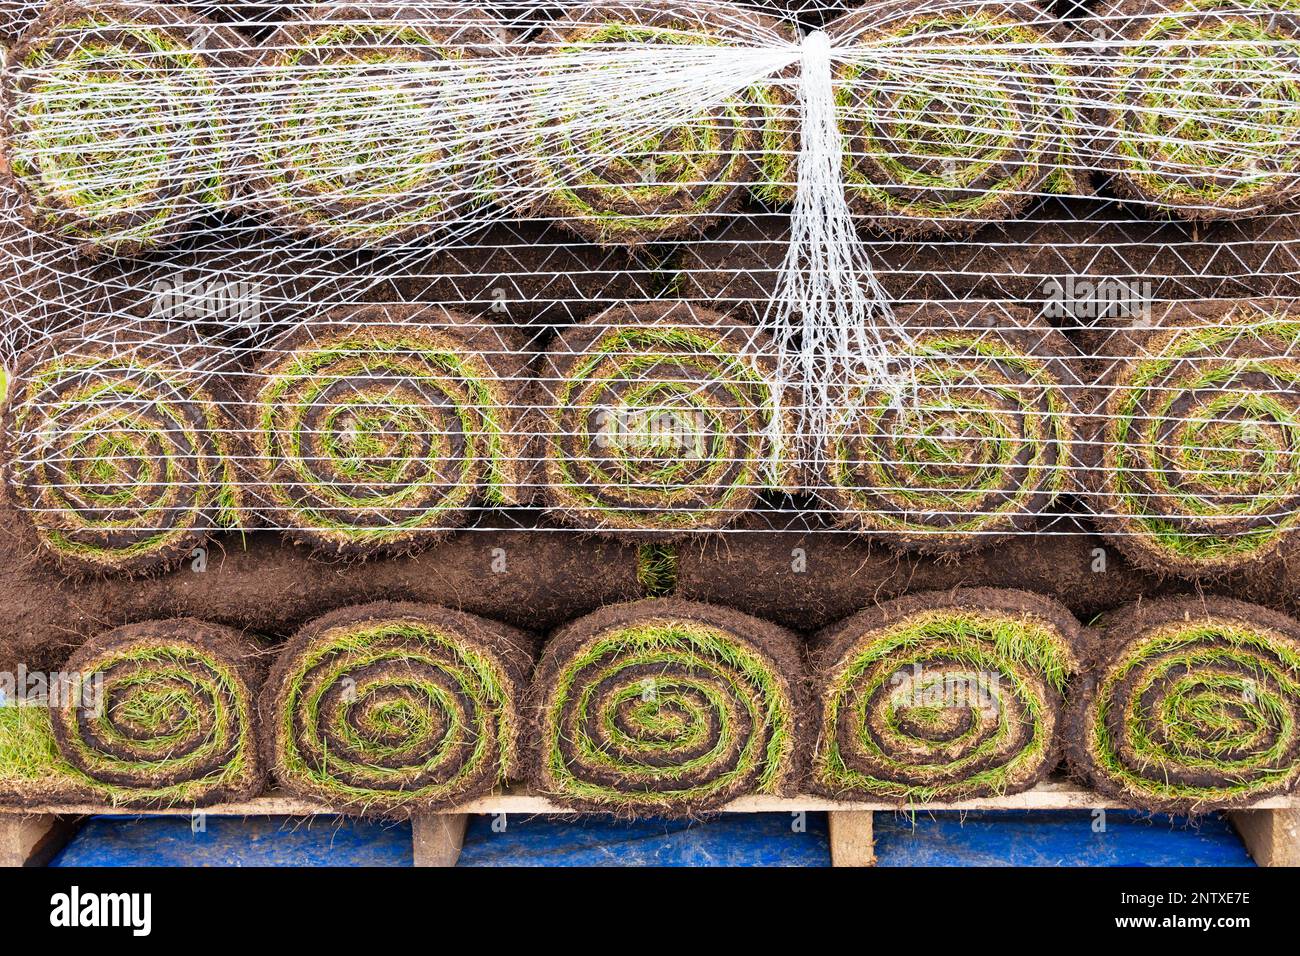 Rolls of fresh grass turf on a pallet wrapped in netting, waiting planting. Swiss roll style. Stock Photo